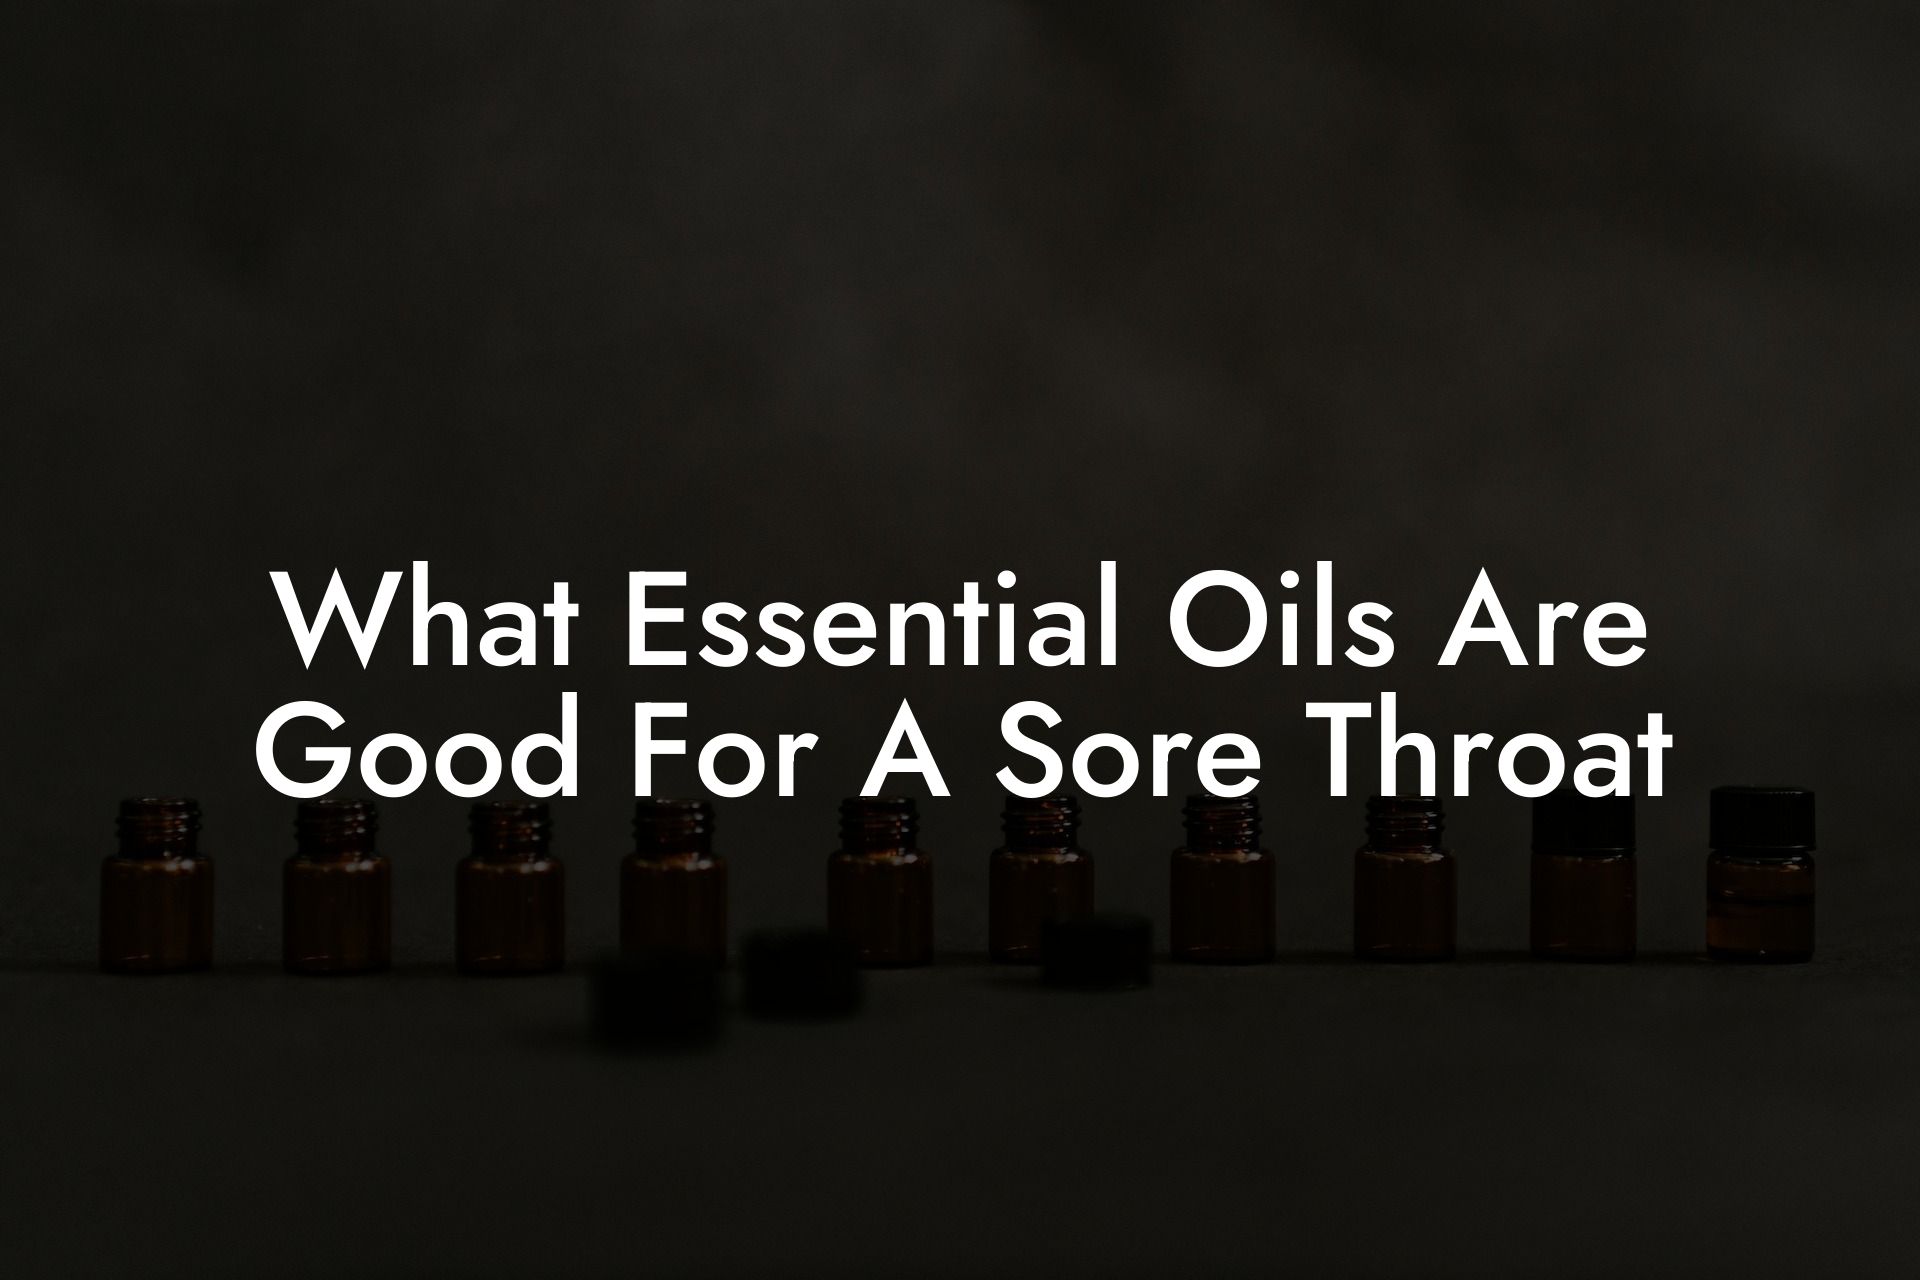 What Essential Oils Are Good For A Sore Throat